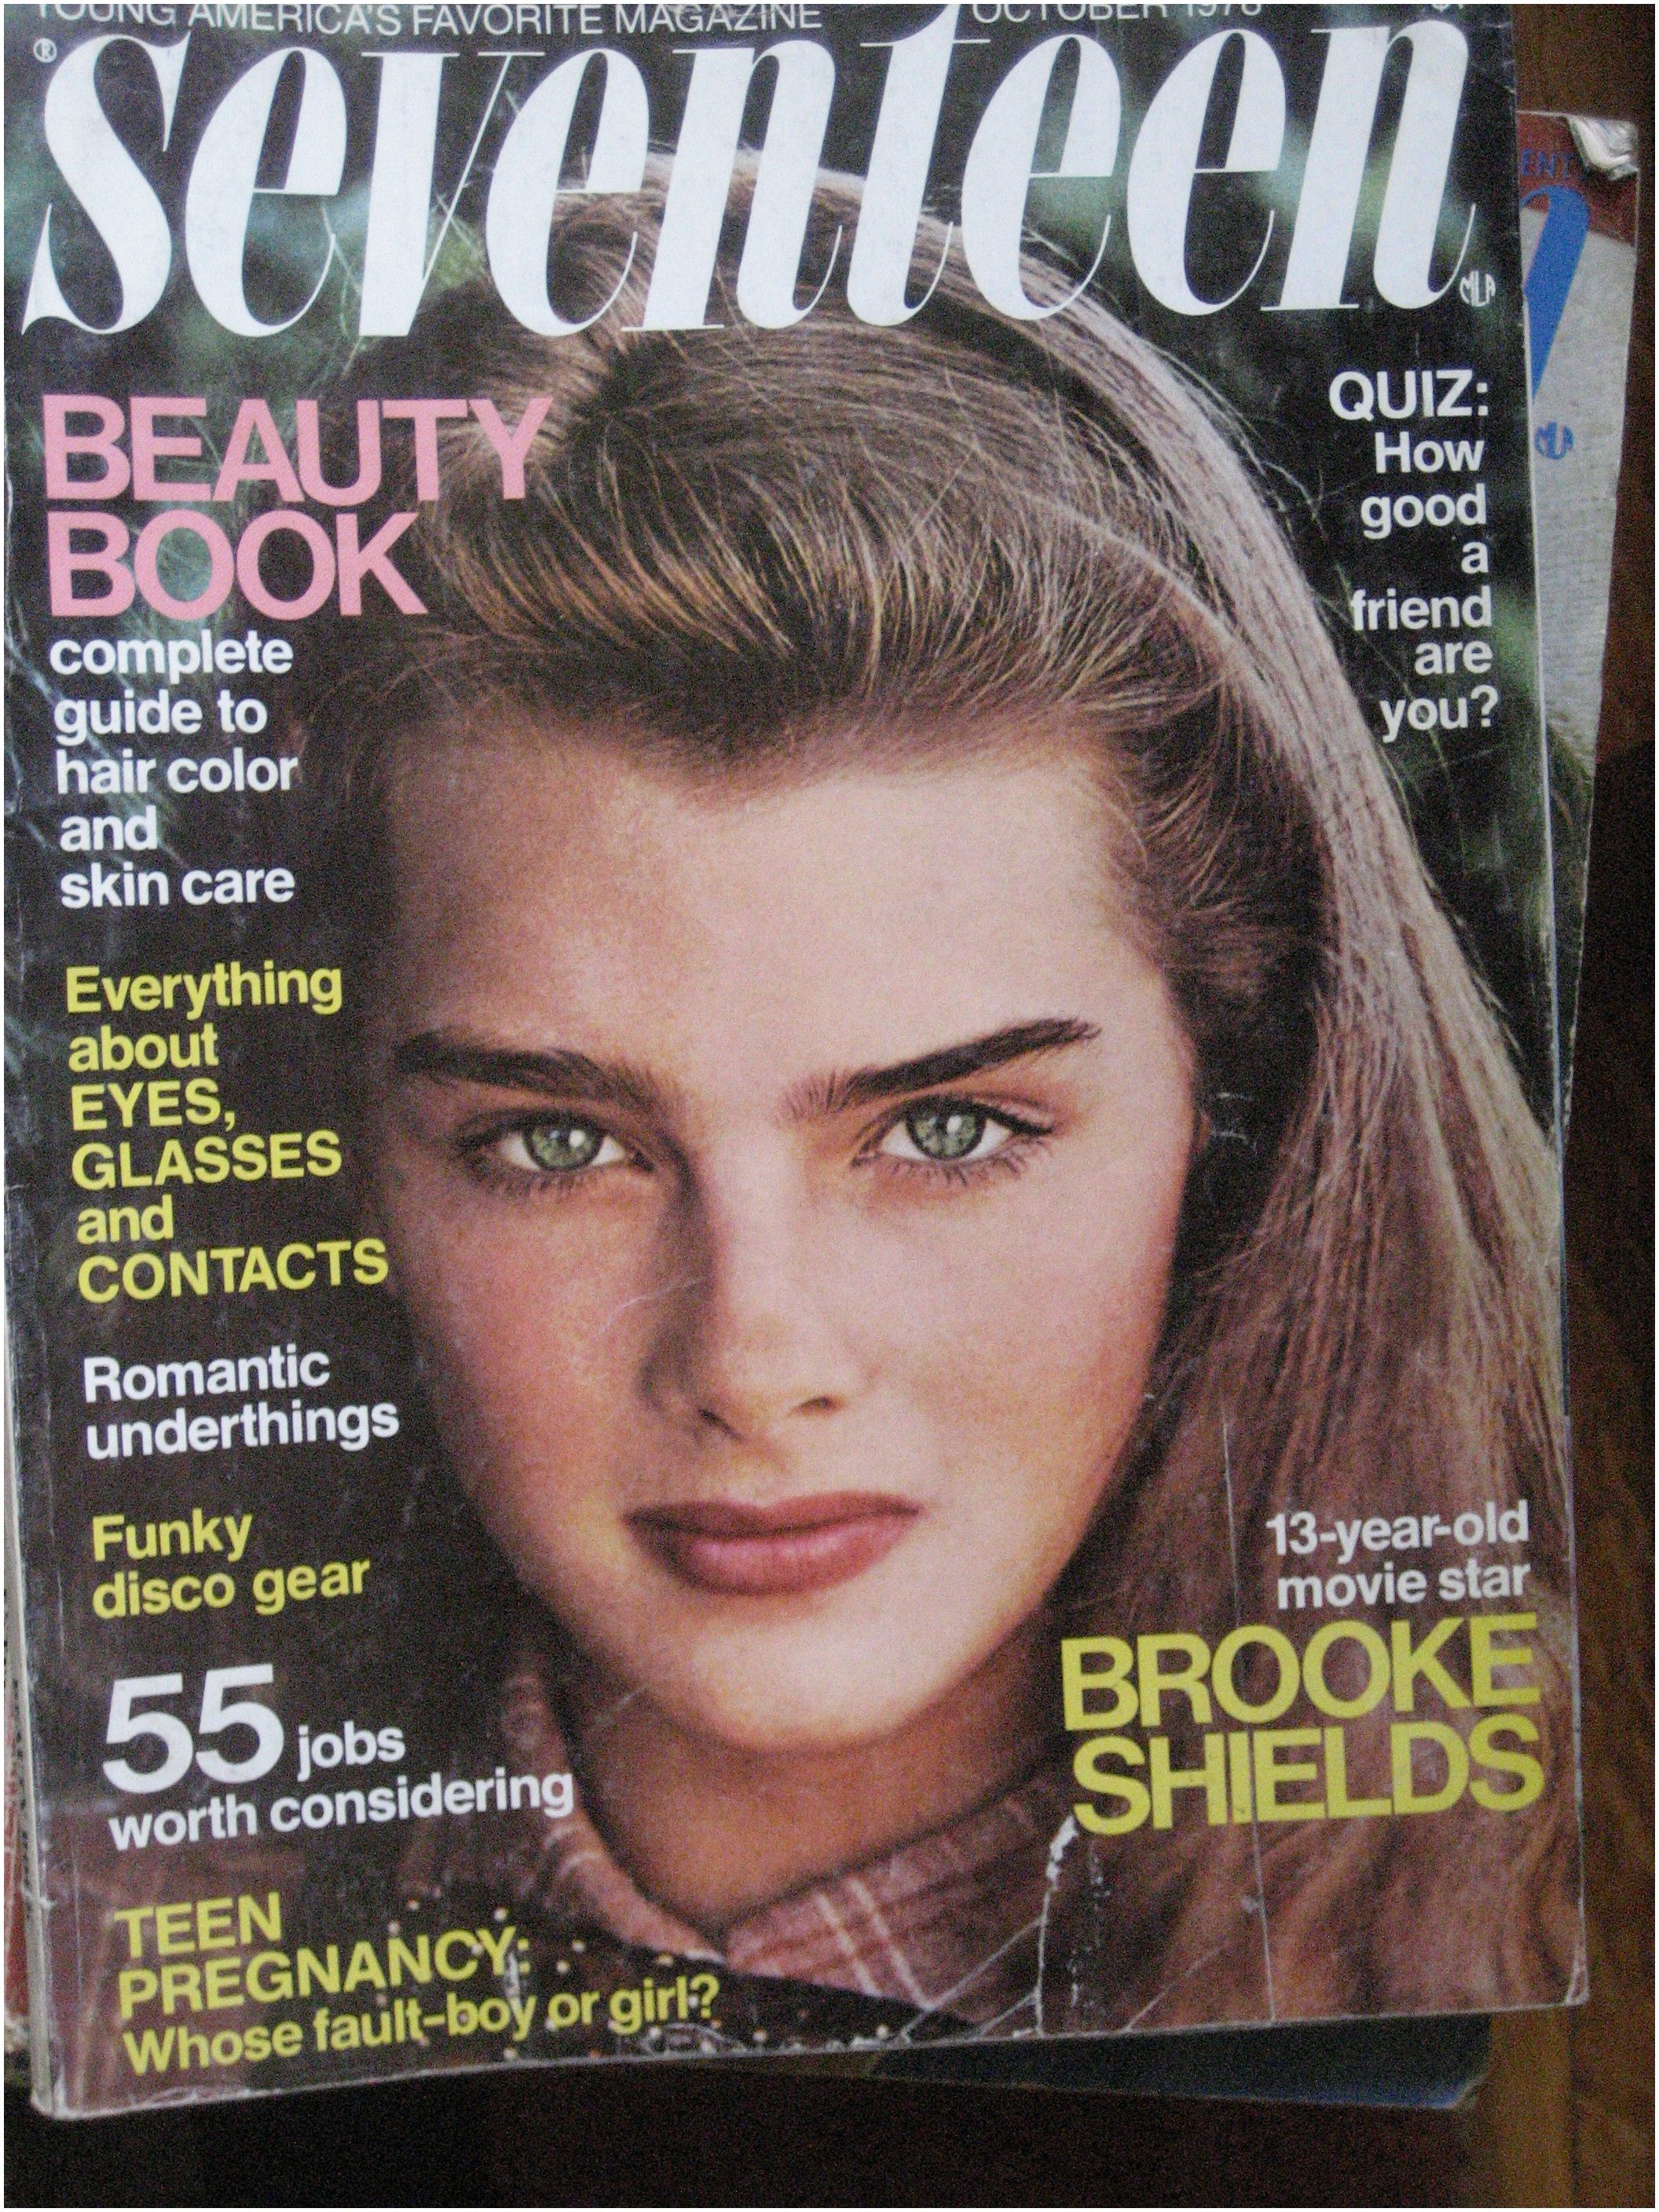 Magazines for 13 Year Olds October 1978 issue Of Seventeen Magazine with Brooke Shields On